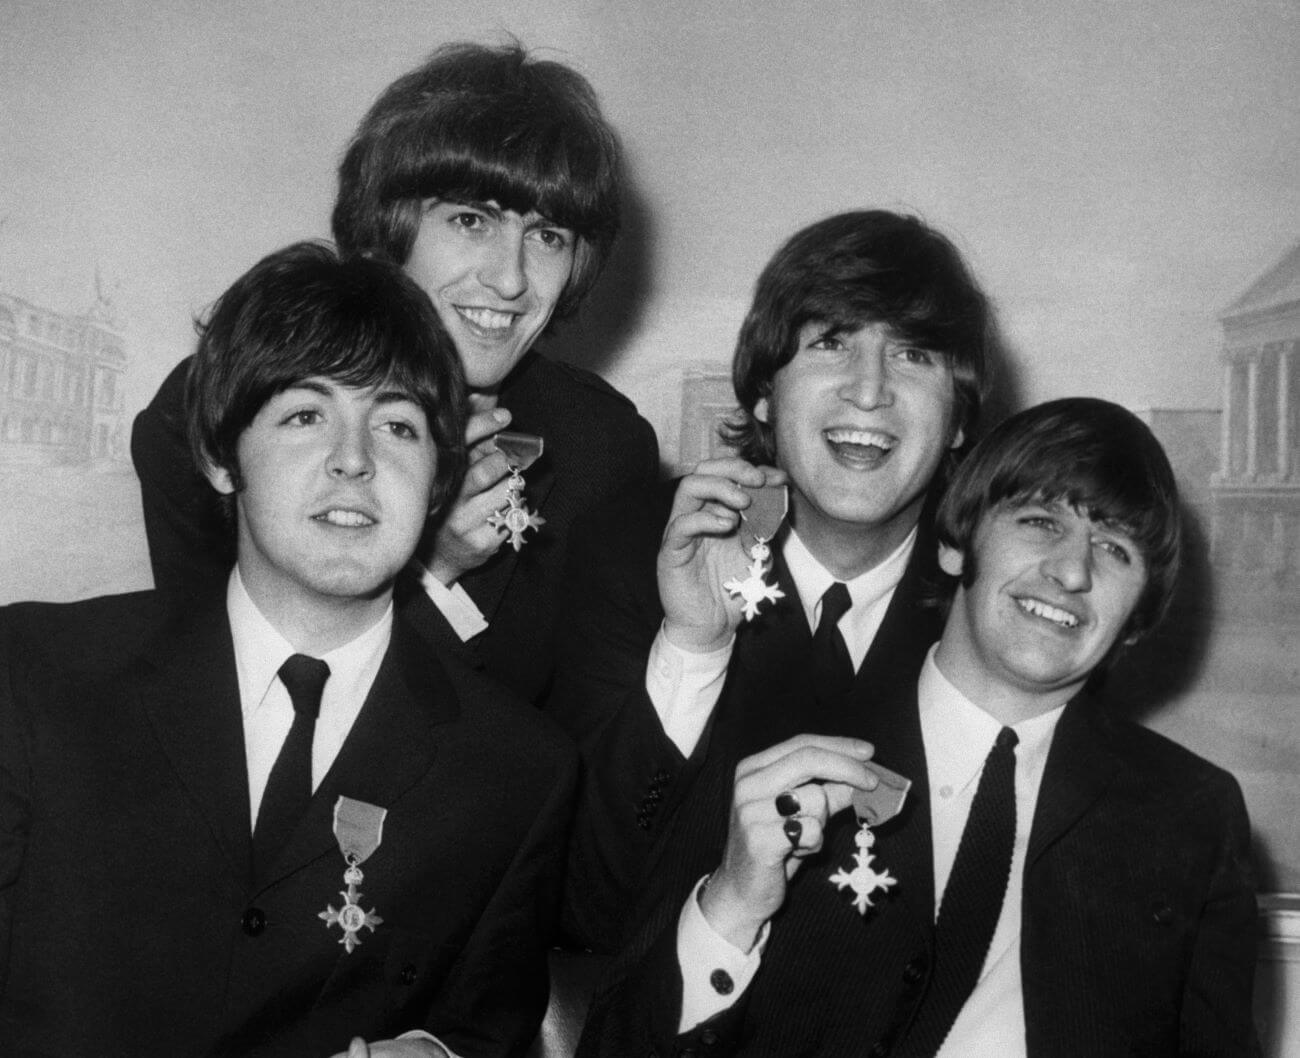 A black and white picture of Paul McCartney, George Harrison, John Lennon, and Ringo Starr with their MBEs.